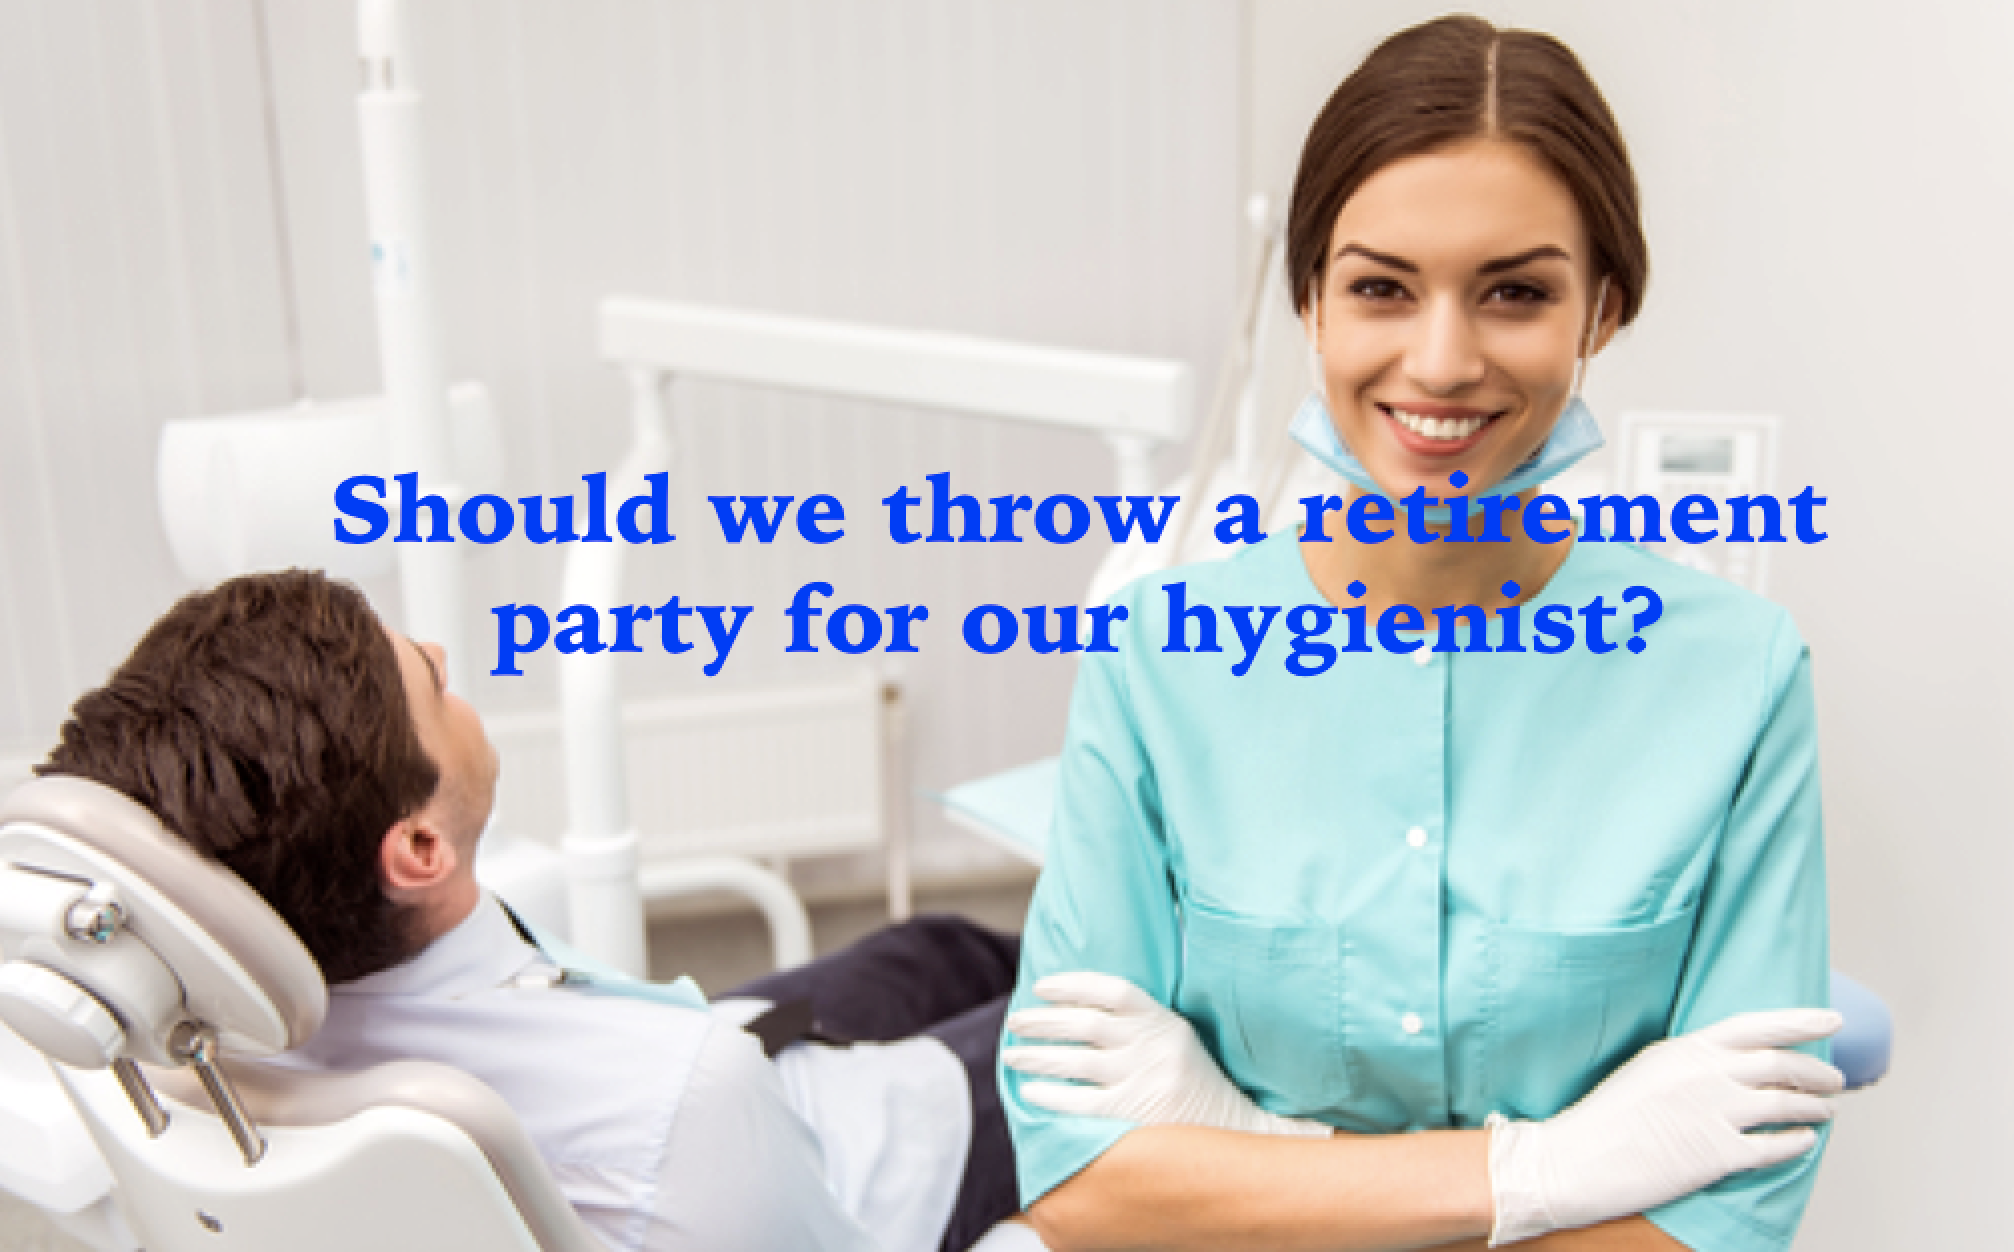 hygienist with text that says should we throw a retirement party for our hygienist?